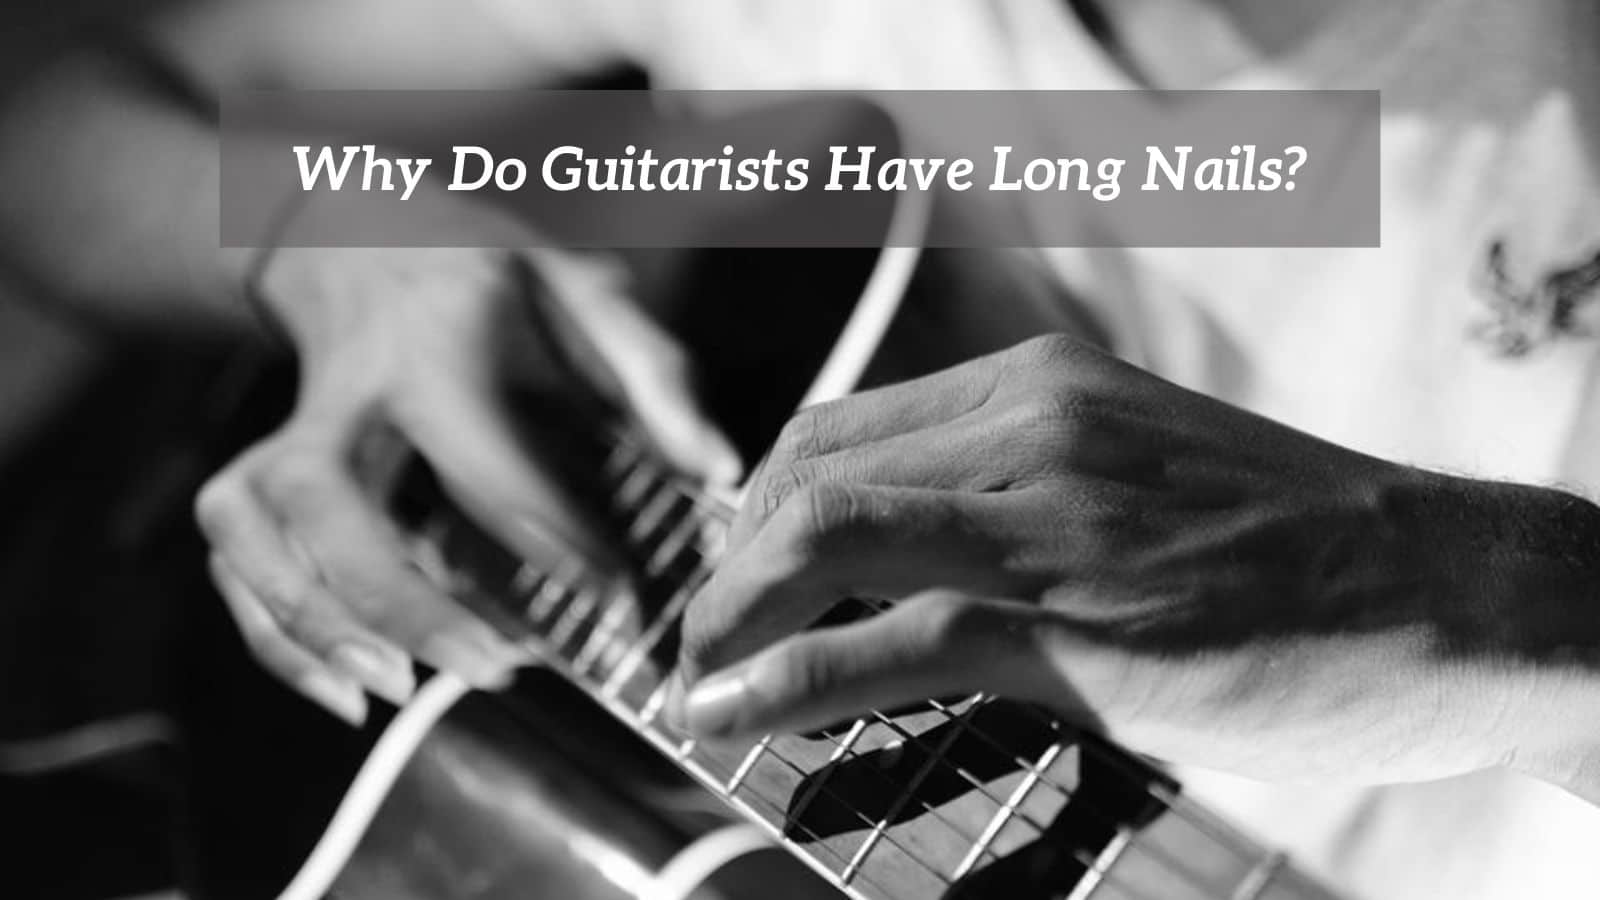 Why Do Guitarists Have Long Nails